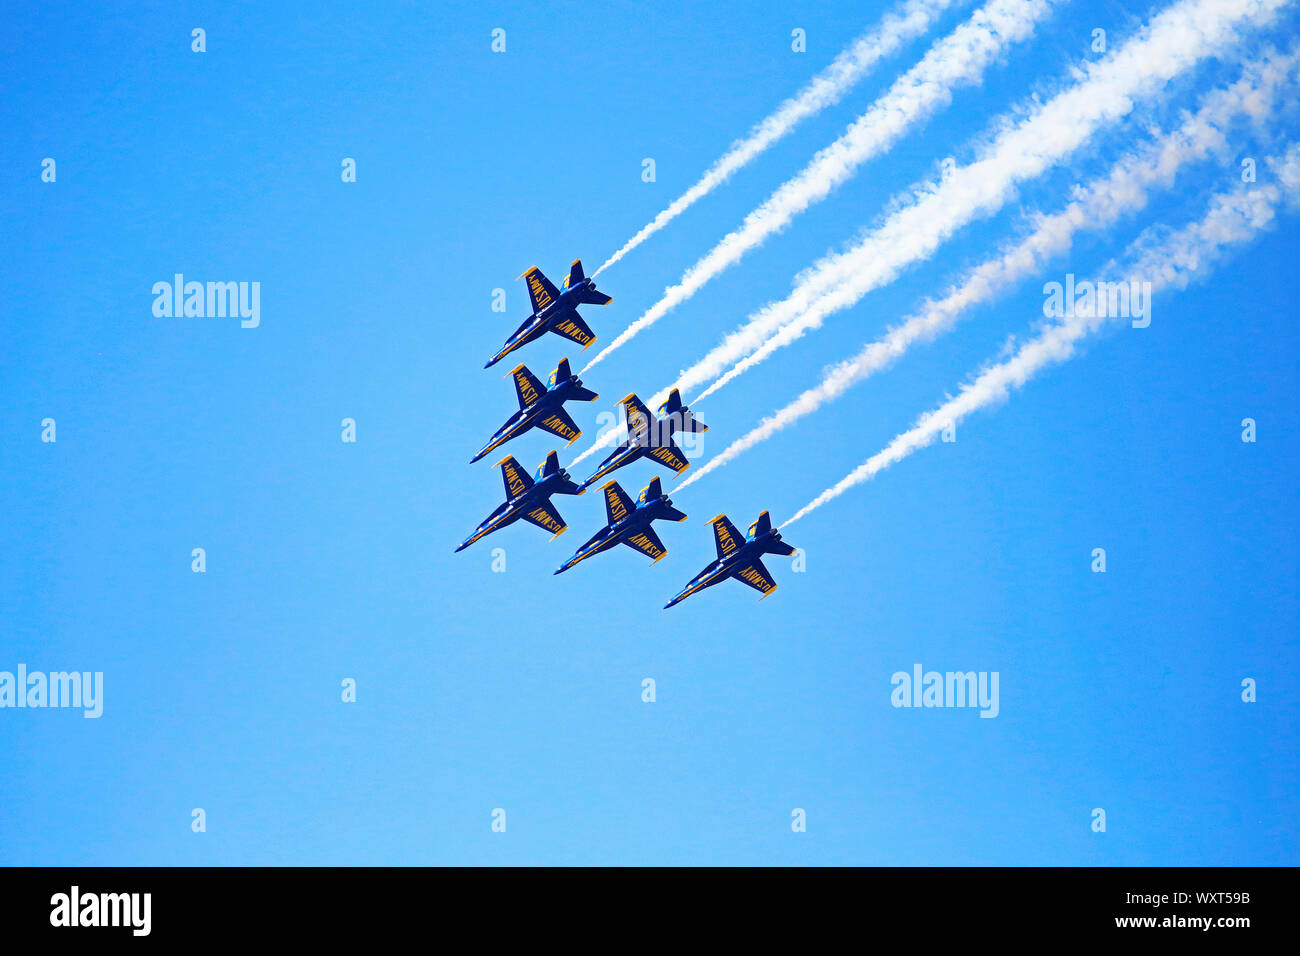 The Blue Angels is the United States Navy's flight demonstration squadron which was initially formed in 1946, making it the second oldes Stock Photo